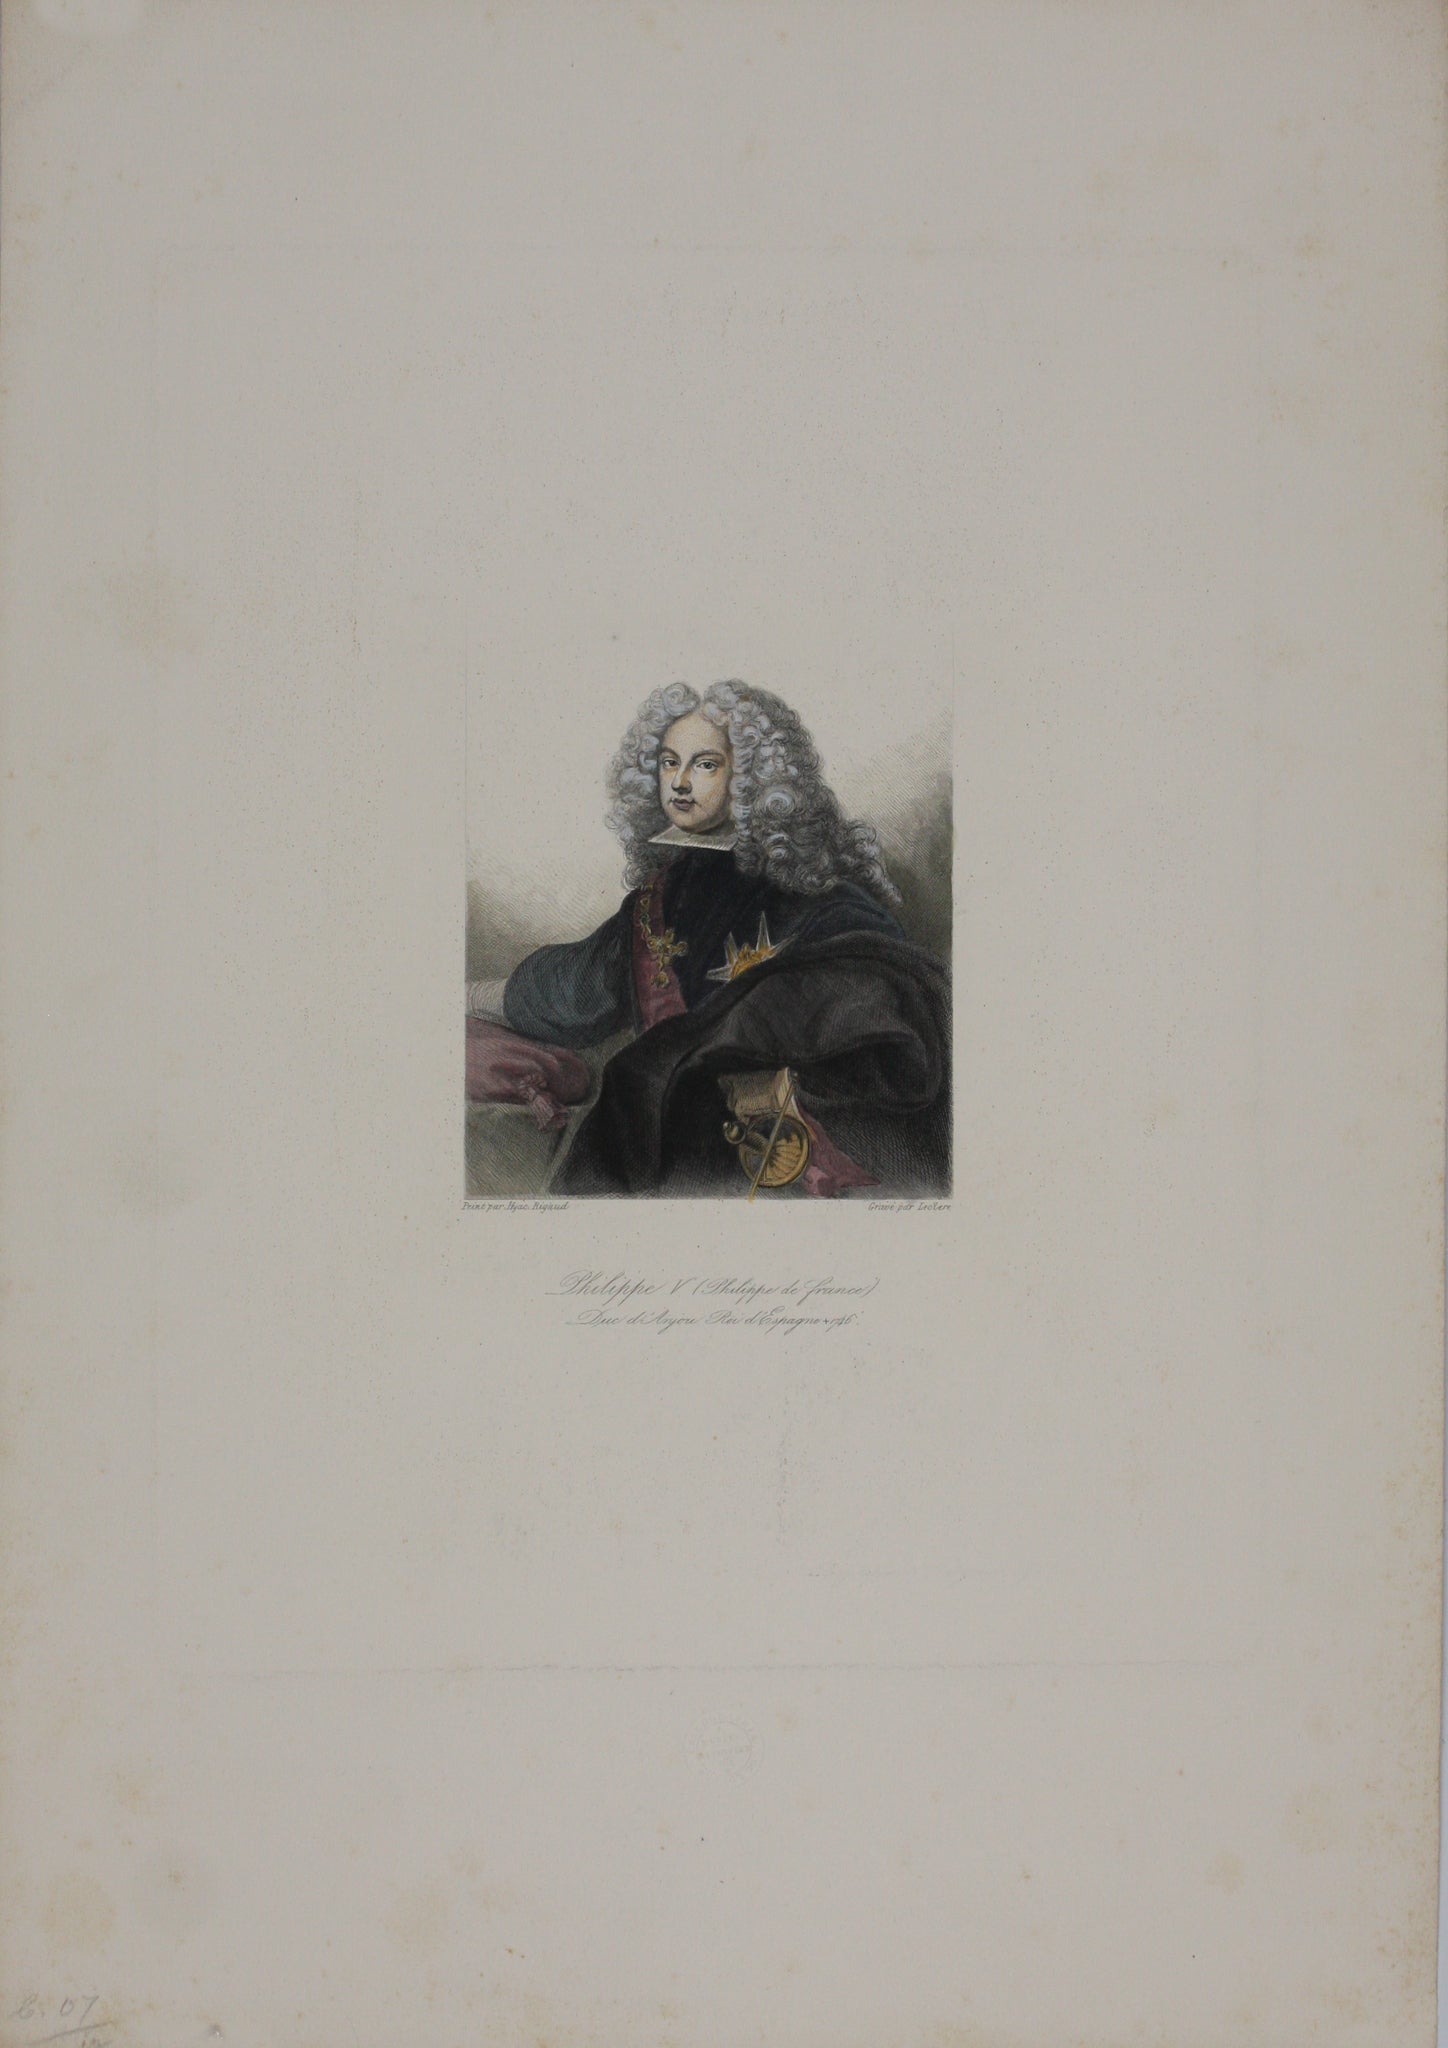 Portrait of Louis Philippe I, King of the French. engraving from 1830.